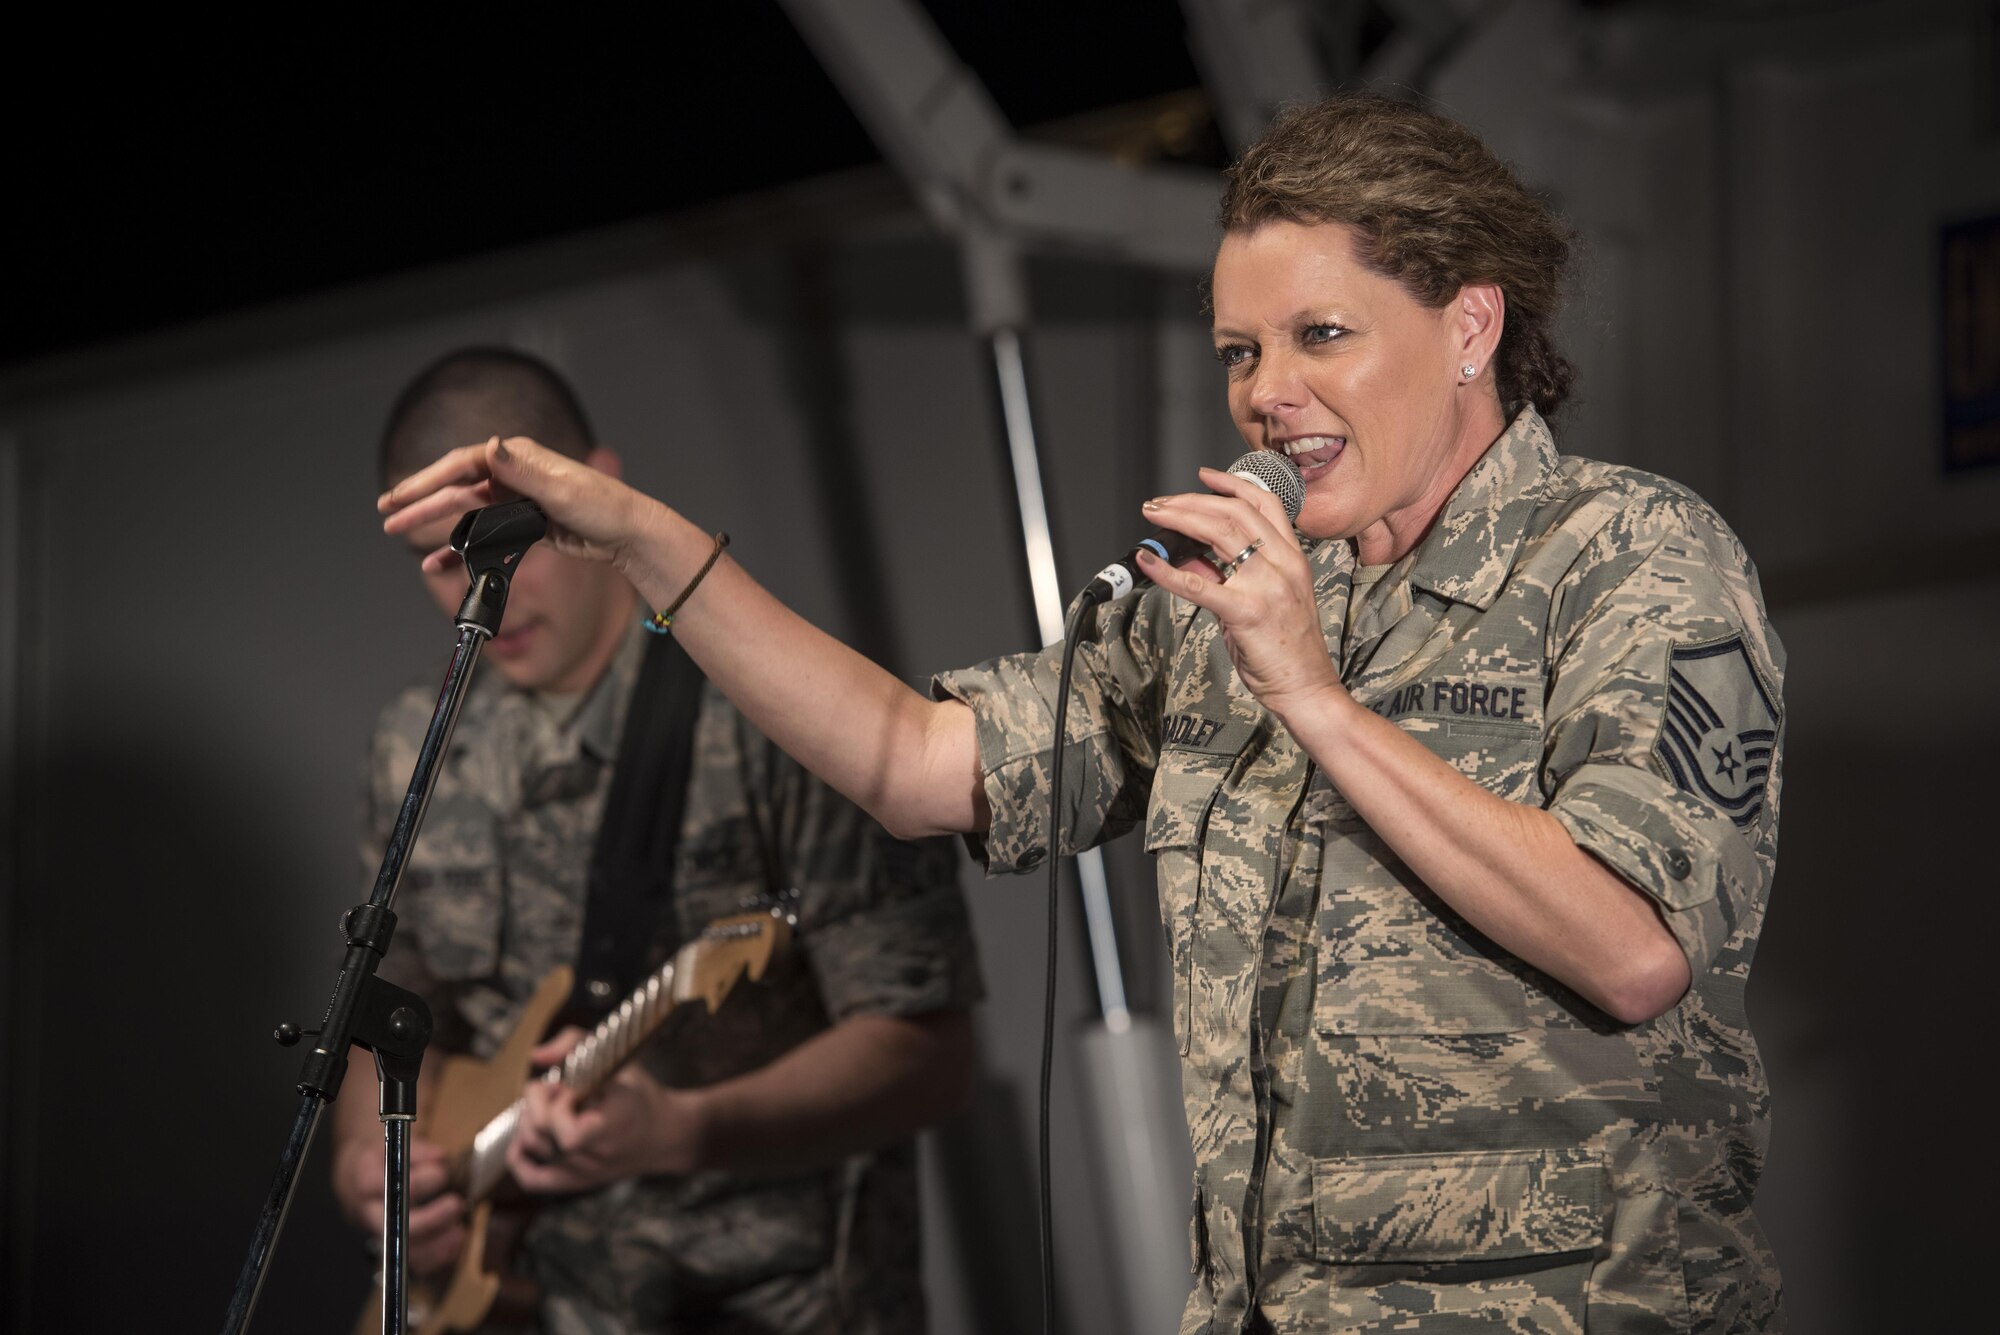 Master Sgt. Julie Bradley, vocalist with the Band of the Pacific-Asia, performs during the 2016 Japanese- American Friendship Festival at Yokota Air Base, Japan, Sept. 17, 2016. The festival is held annually at Yokota; more than 185,000 festivalgoers attended in 2015. (U.S. Air Force photo by Staff Sgt. Cody H. Ramirez/Released)